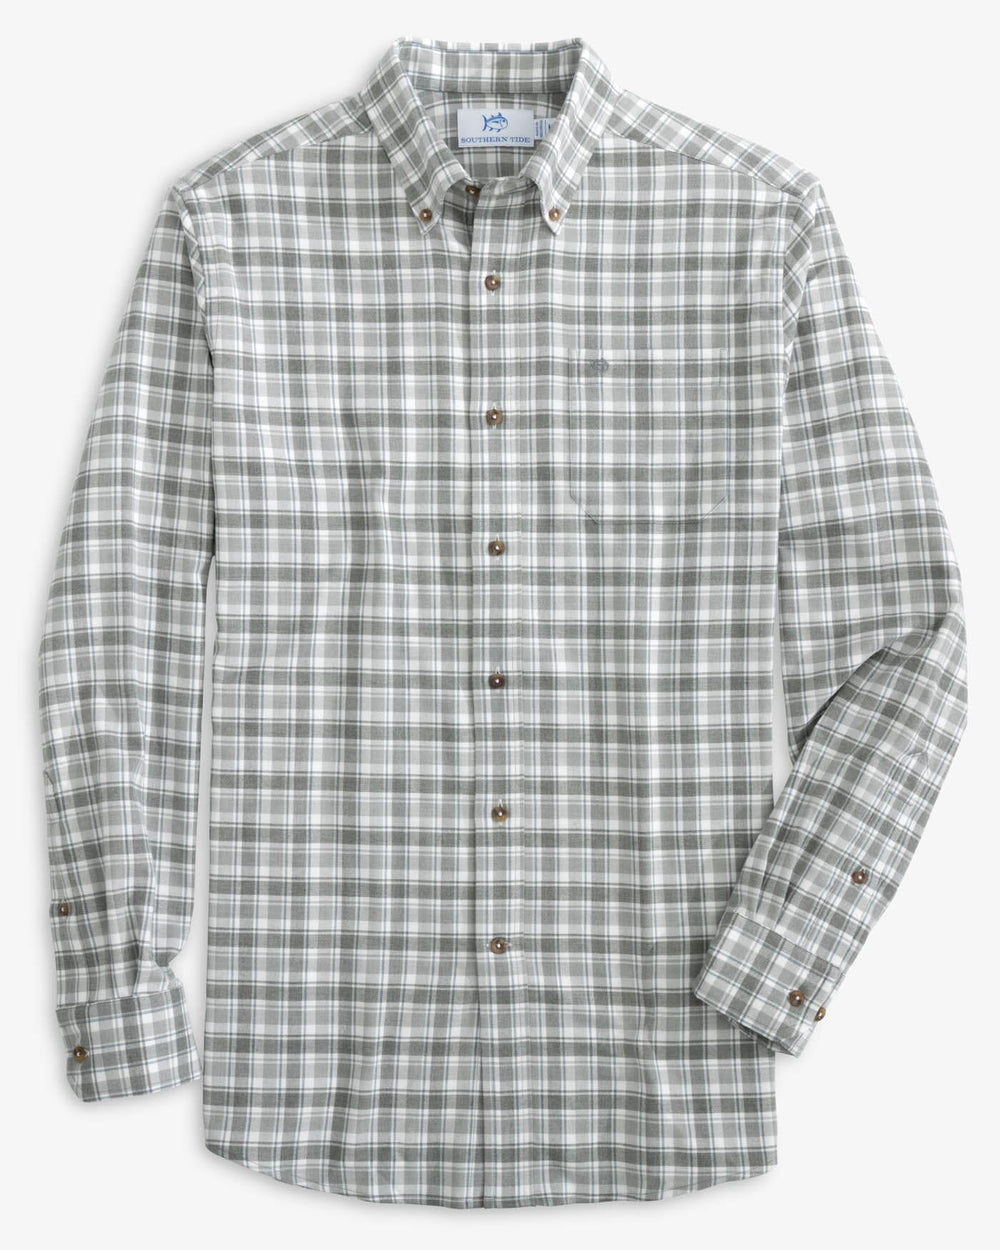 The front view of the Southern Tide Heather Chipley Plaid Intercoastal Flannel Sport Shirts by Southern Tide - Heather Shadow Grey